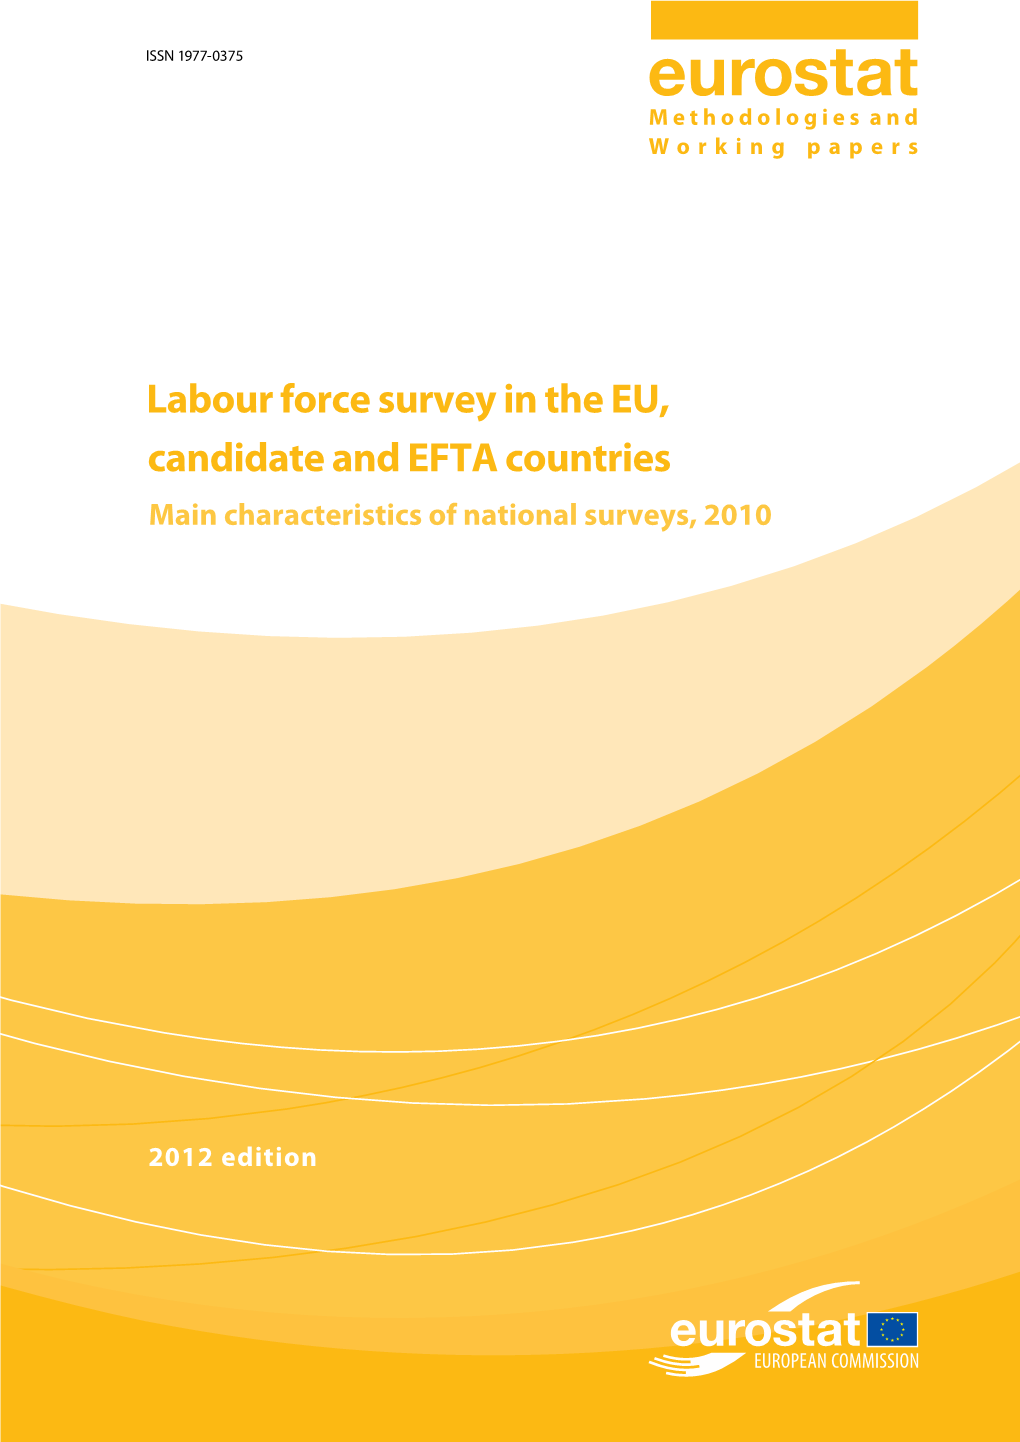 Labour Force Survey in the EU, Candidate and EFTA Countries Main Characteristics of National Surveys, 2010